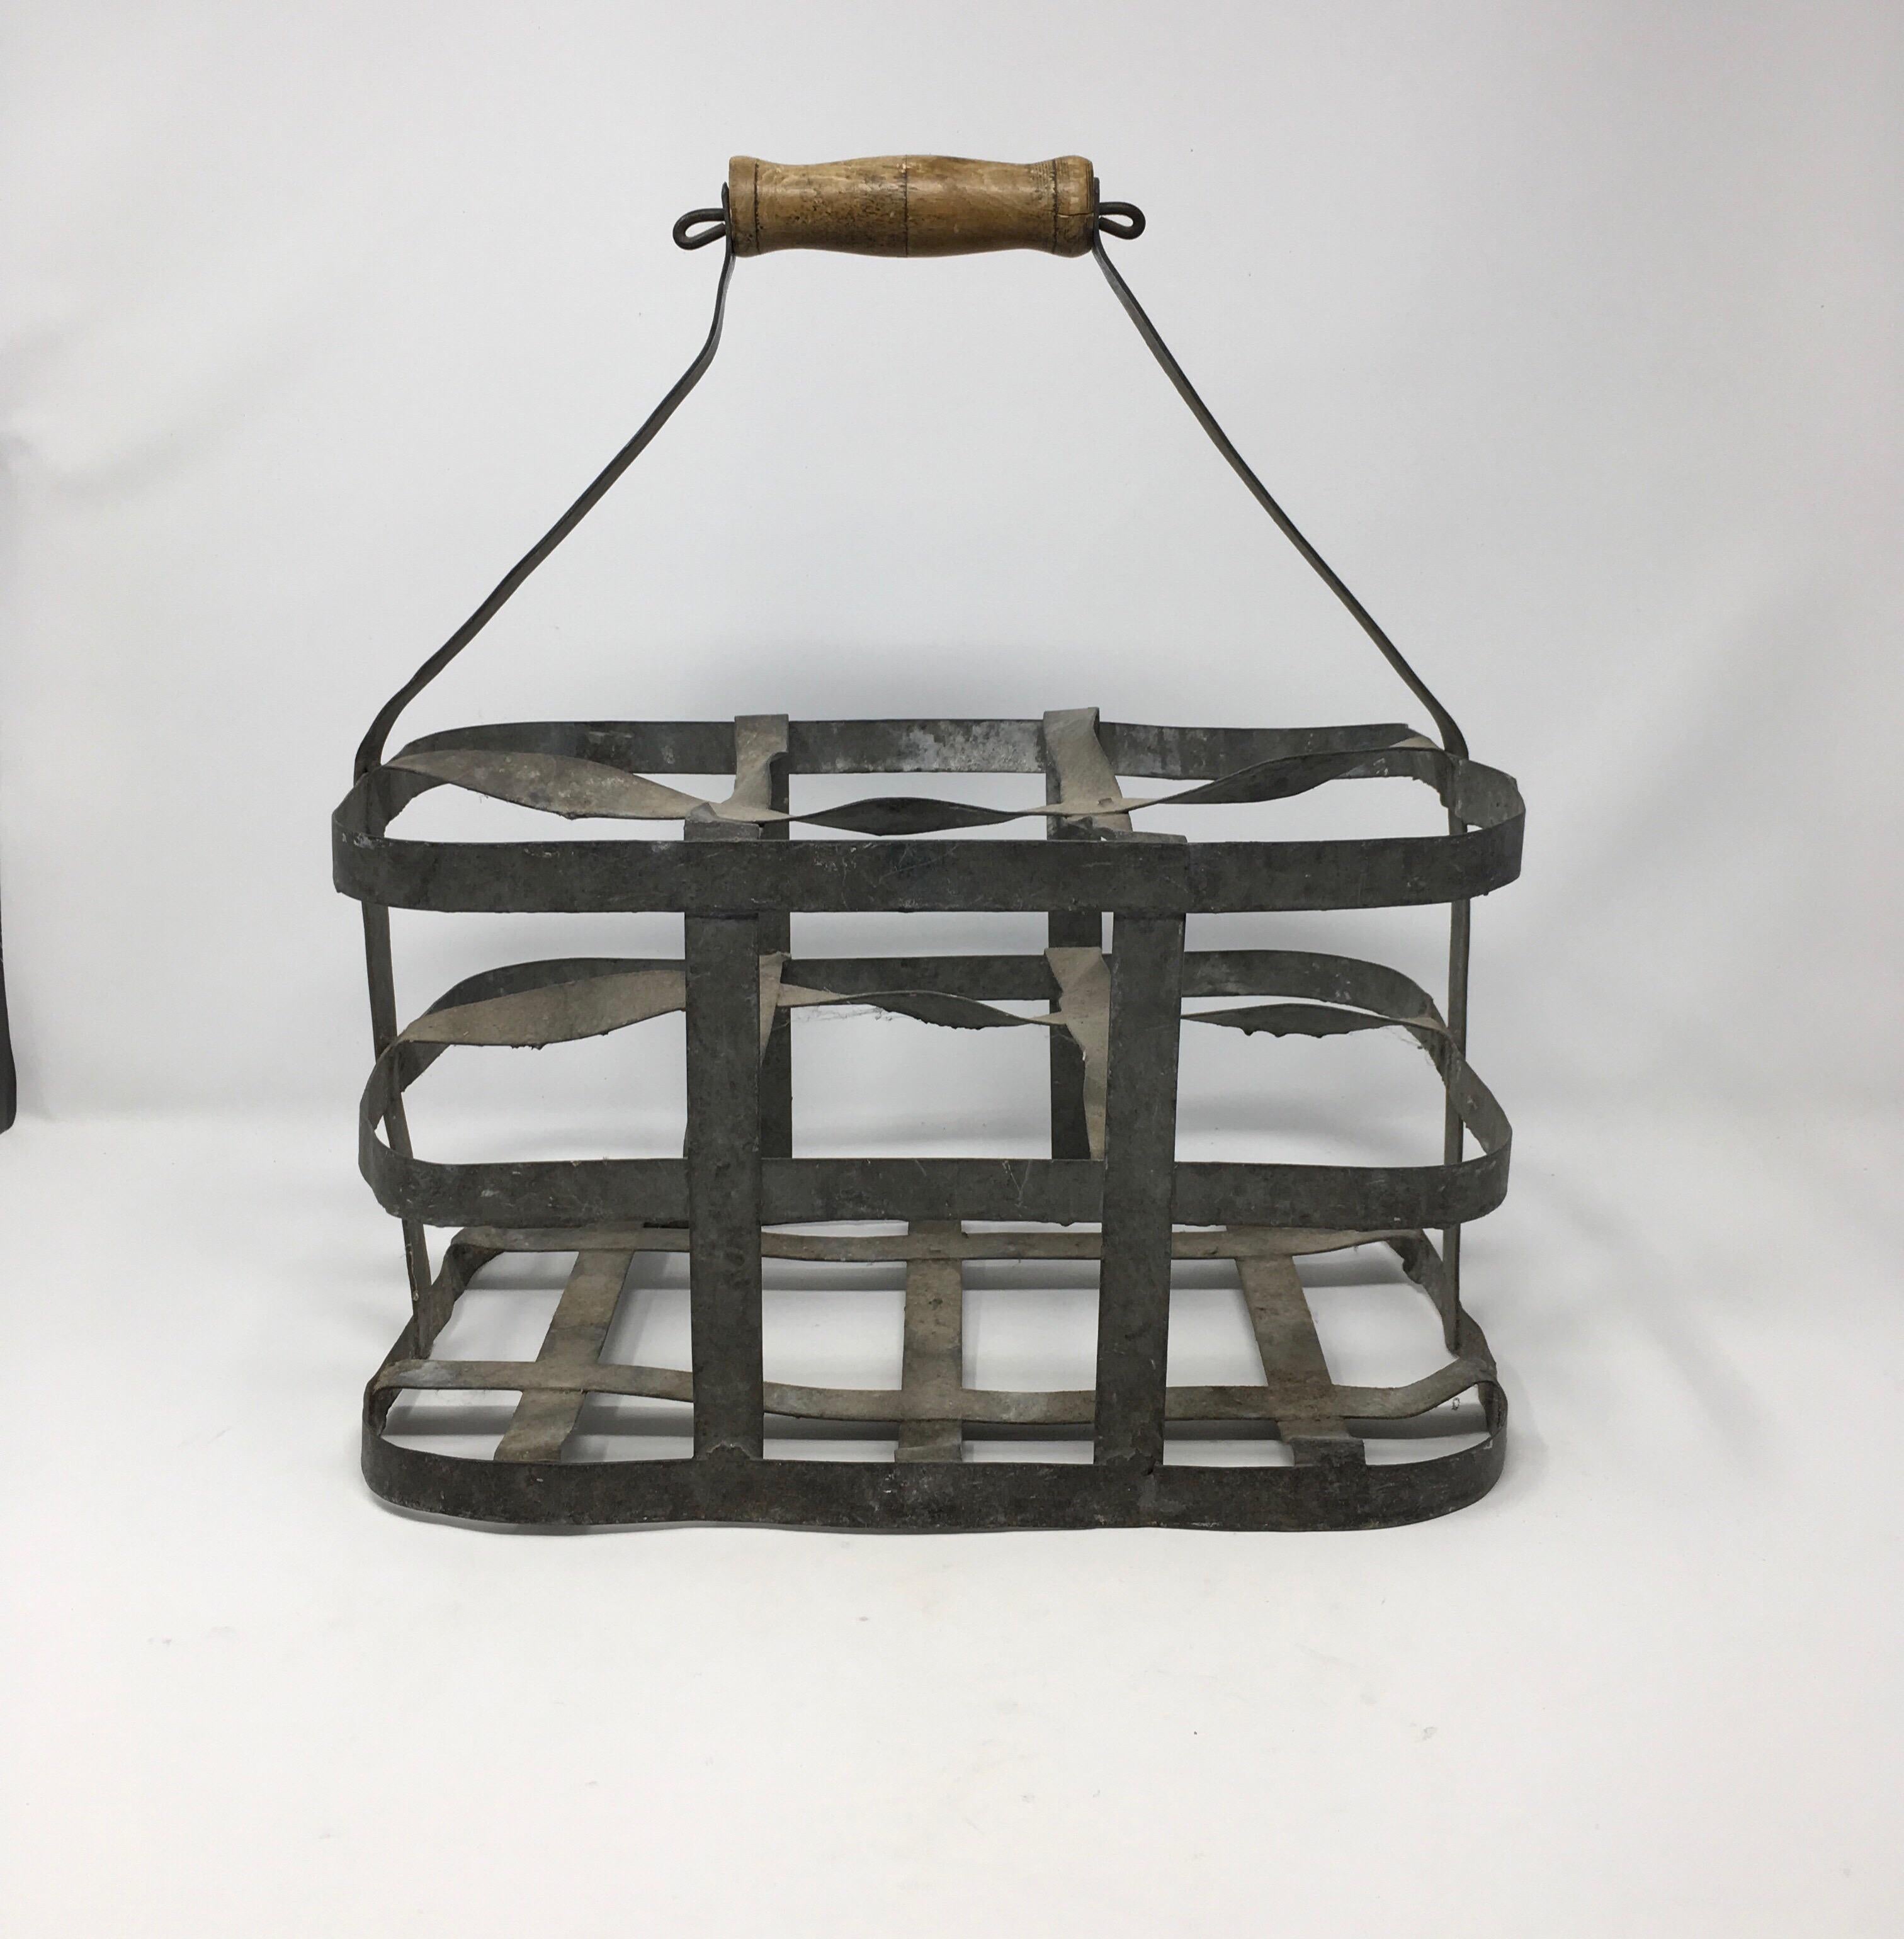 Early 20th century French six bottle wine carrier basket from France. Antique French handmade wine bottle carrier rack for 6 bottles, made of metal with a wooden handle. Used in France for carrying wine bottles when going to the wine cave. Can now